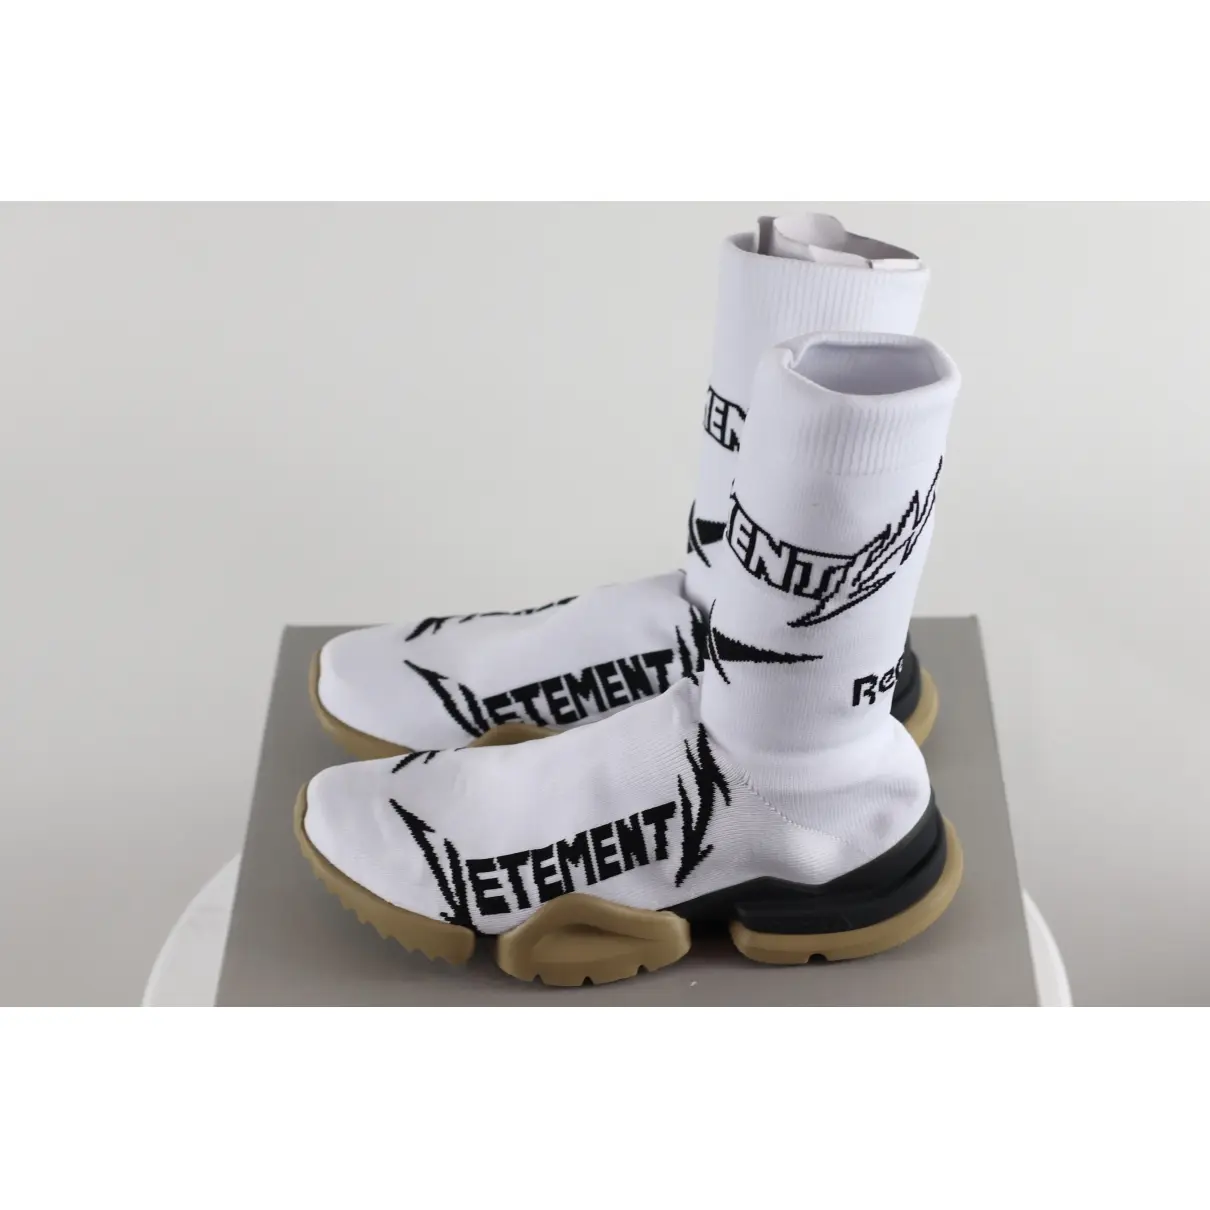 Reebok x VETEMENTS Cloth high trainers for sale